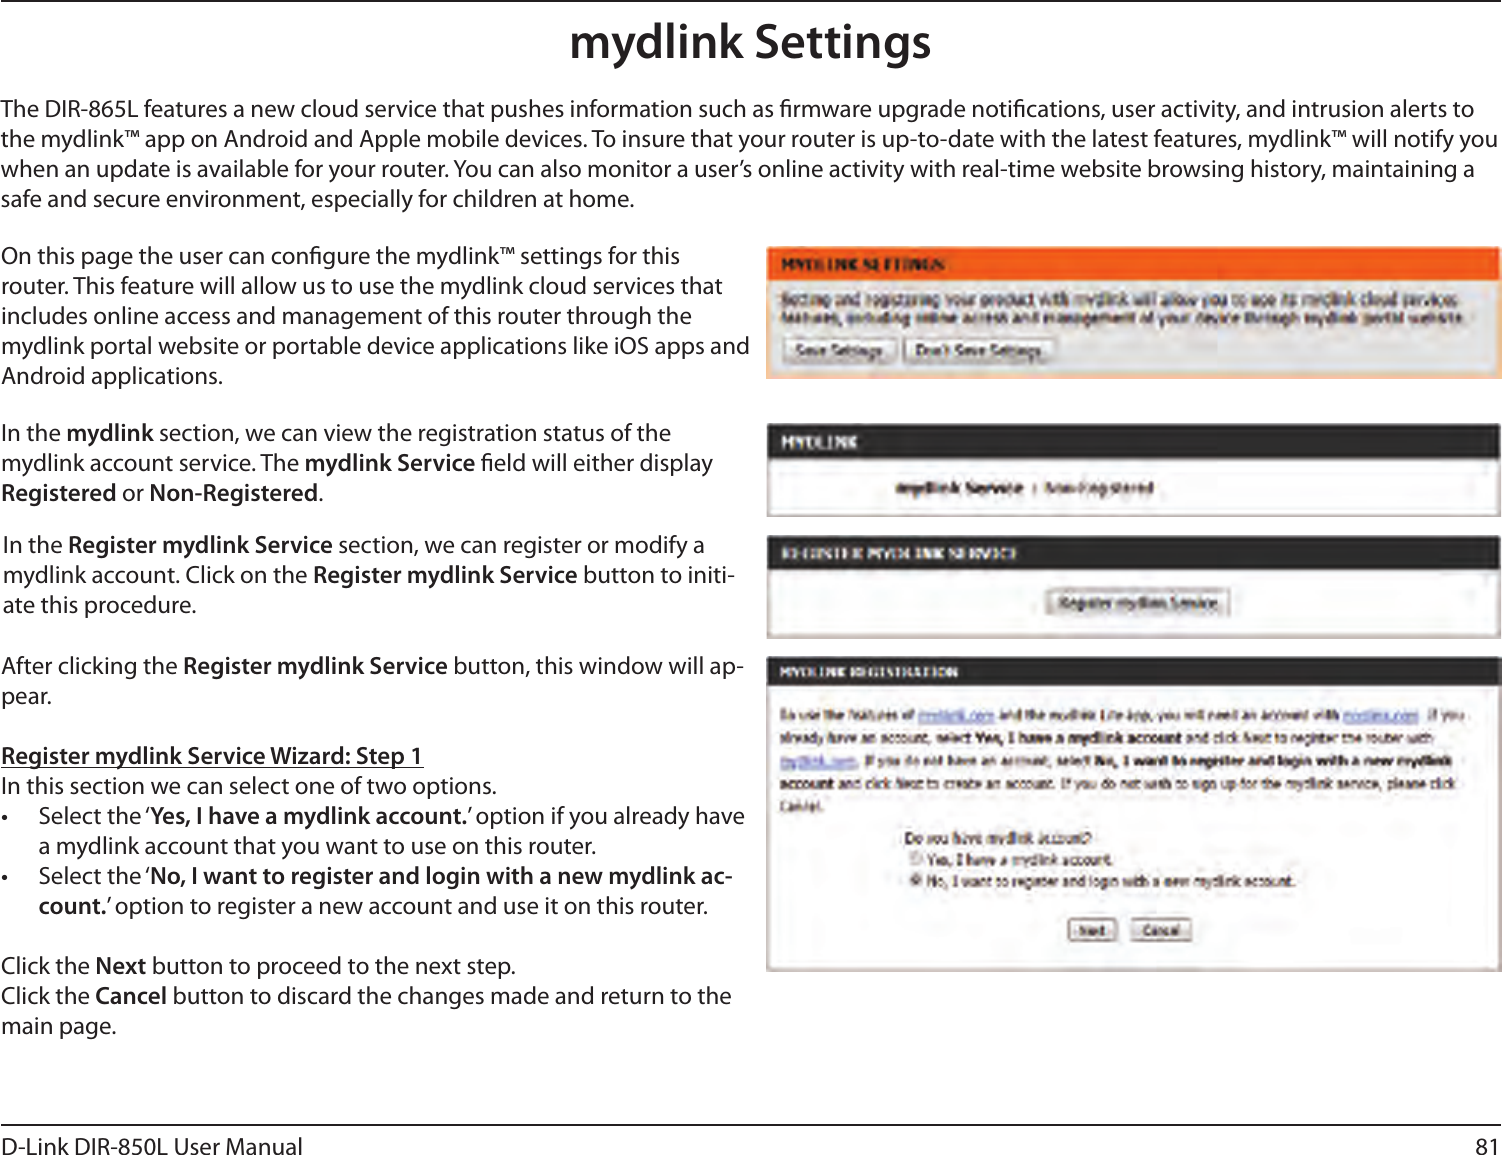 81D-Link DIR-850L User Manualmydlink SettingsOn this page the user can congure the mydlink™ settings for this router. This feature will allow us to use the mydlink cloud services that includes online access and management of this router through the mydlink portal website or portable device applications like iOS apps and Android applications.In the mydlink section, we can view the registration status of the mydlink account service. The mydlink Service eld will either display Registered or Non-Registered.In the Register mydlink Service section, we can register or modify a mydlink account. Click on the Register mydlink Service button to initi-ate this procedure.After clicking the Register mydlink Service button, this window will ap-pear.Register mydlink Service Wizard: Step 1In this section we can select one of two options.•  Select the ‘Yes, I have a mydlink account.’ option if you already have a mydlink account that you want to use on this router. •  Select the ‘No, I want to register and login with a new mydlink ac-count.’ option to register a new account and use it on this router.Click the Next button to proceed to the next step. Click the Cancel button to discard the changes made and return to the main page.The DIR-865L features a new cloud service that pushes information such as rmware upgrade notications, user activity, and intrusion alerts to the mydlink™ app on Android and Apple mobile devices. To insure that your router is up-to-date with the latest features, mydlink™ will notify you when an update is available for your router. You can also monitor a user’s online activity with real-time website browsing history, maintaining a safe and secure environment, especially for children at home.